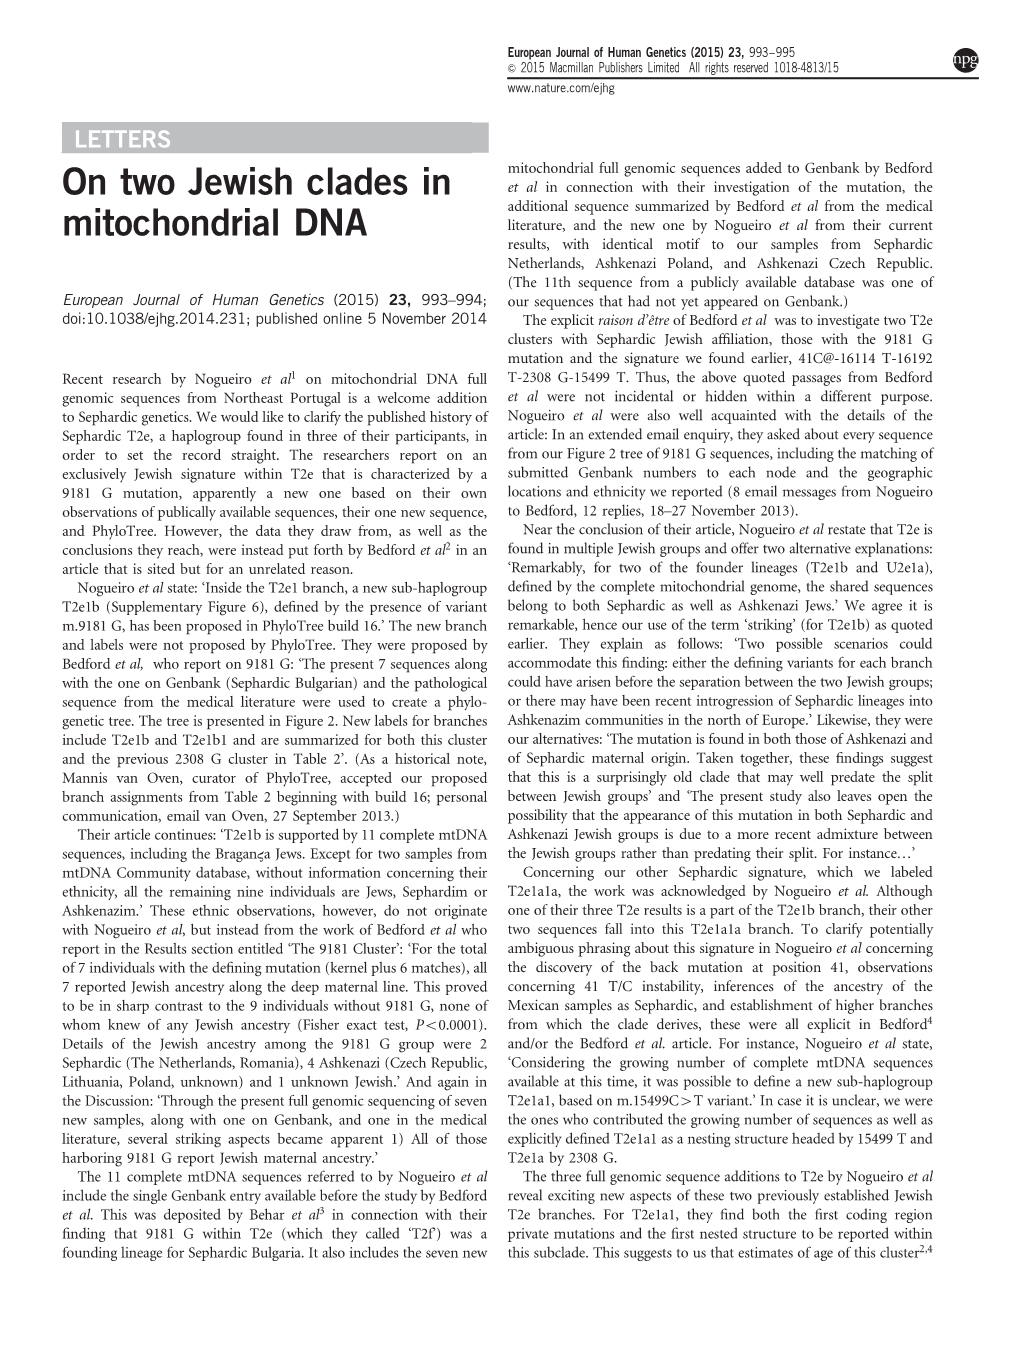 On Two Jewish Clades in Mitochondrial